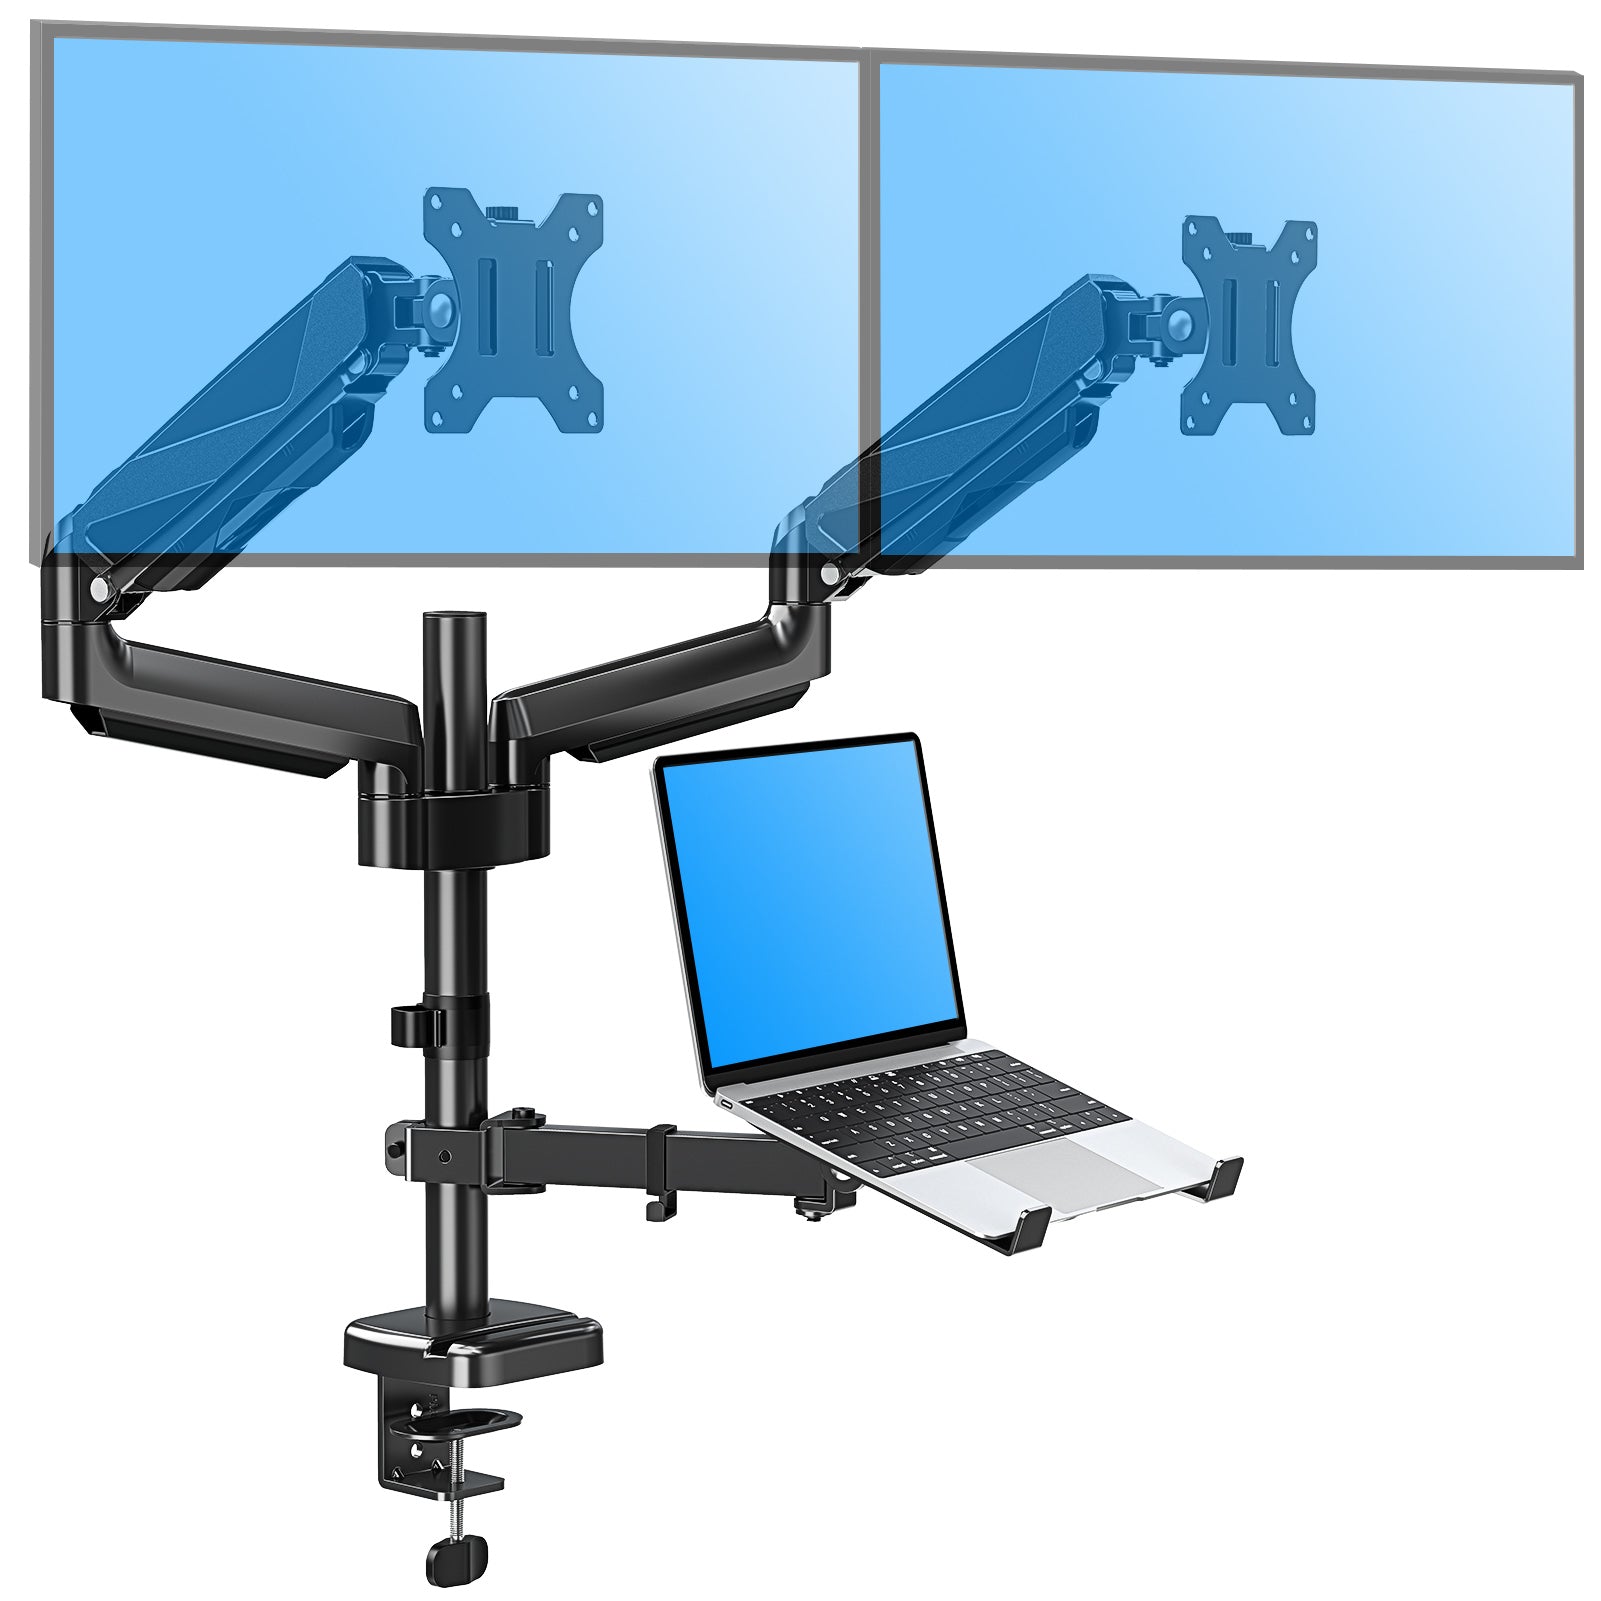 MOUNTUP Dual Monitor and Laptop Stand for Max 32 Monitor & 17 Laptop